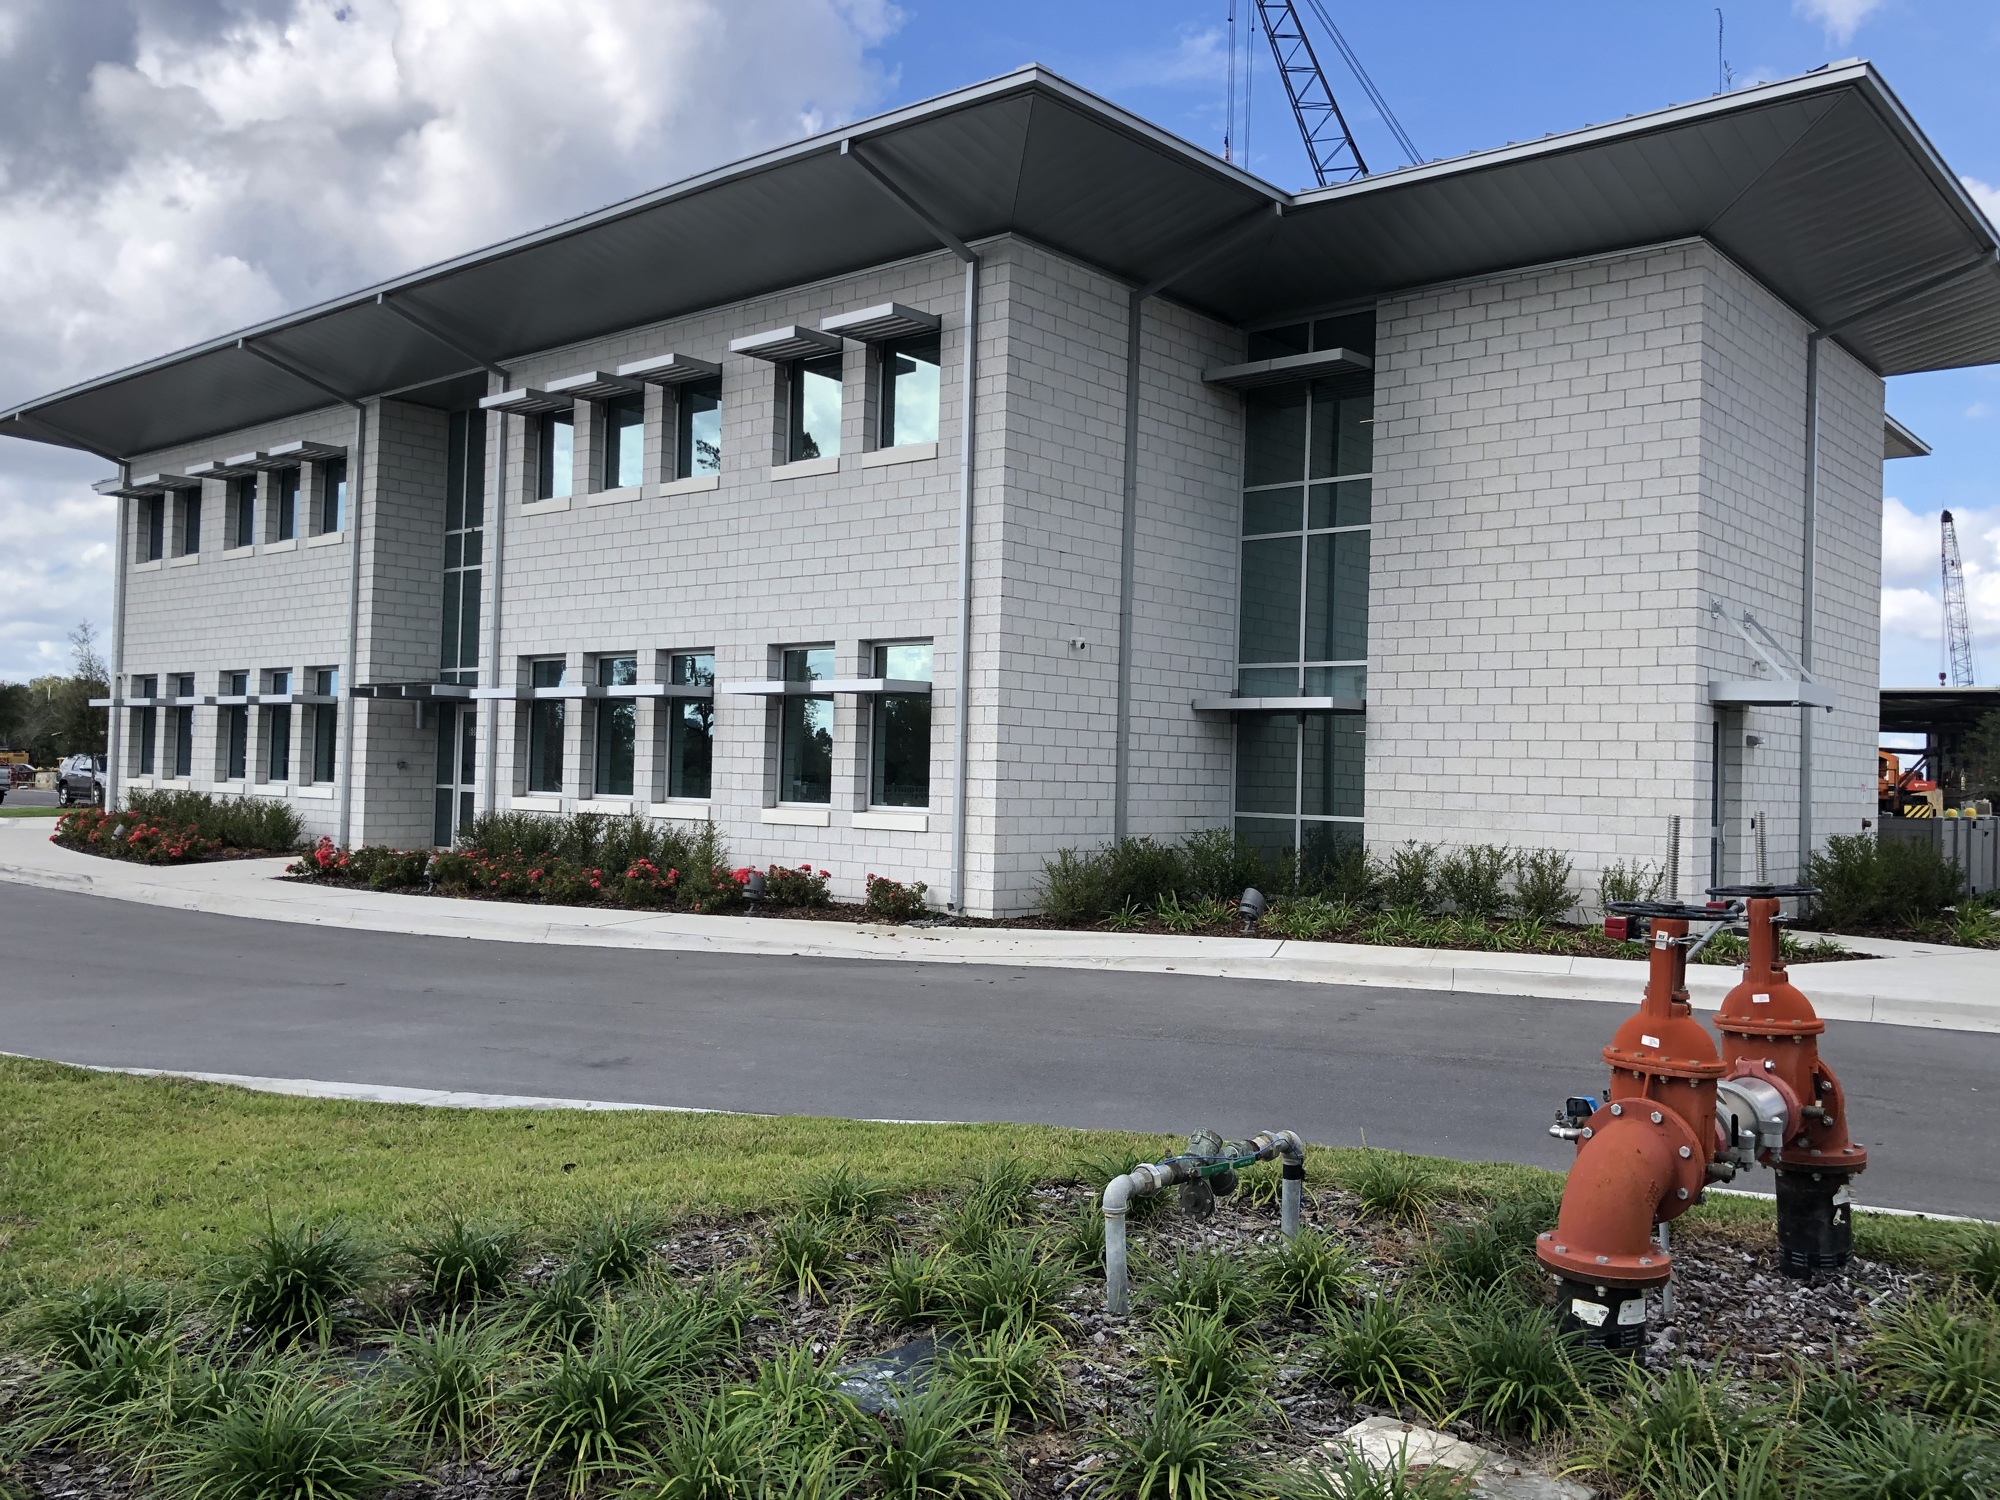 The new Mobro Marine office building in Green Cove Springs more than doubles the amount of space of the old building.